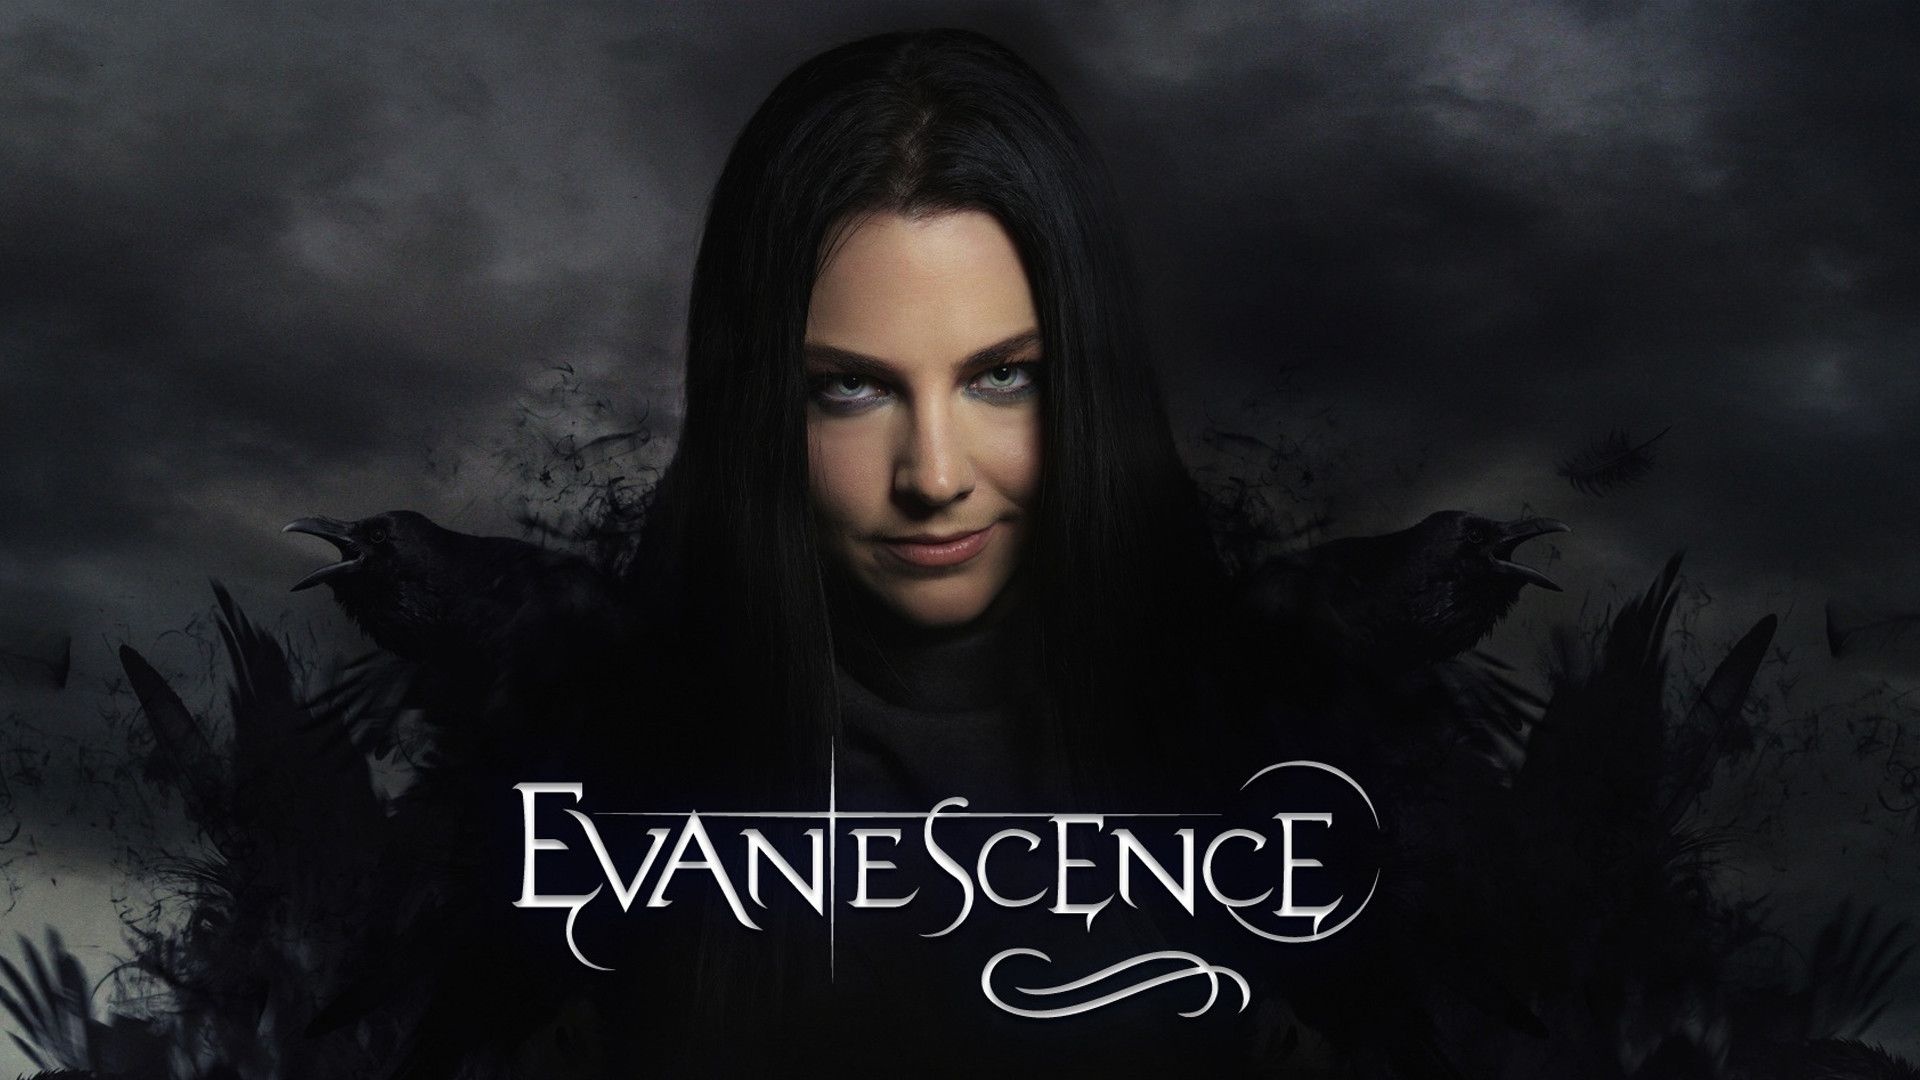 Evanescence wallpapers, Emotive music, Unique style, Powerful vocals, 1920x1080 Full HD Desktop